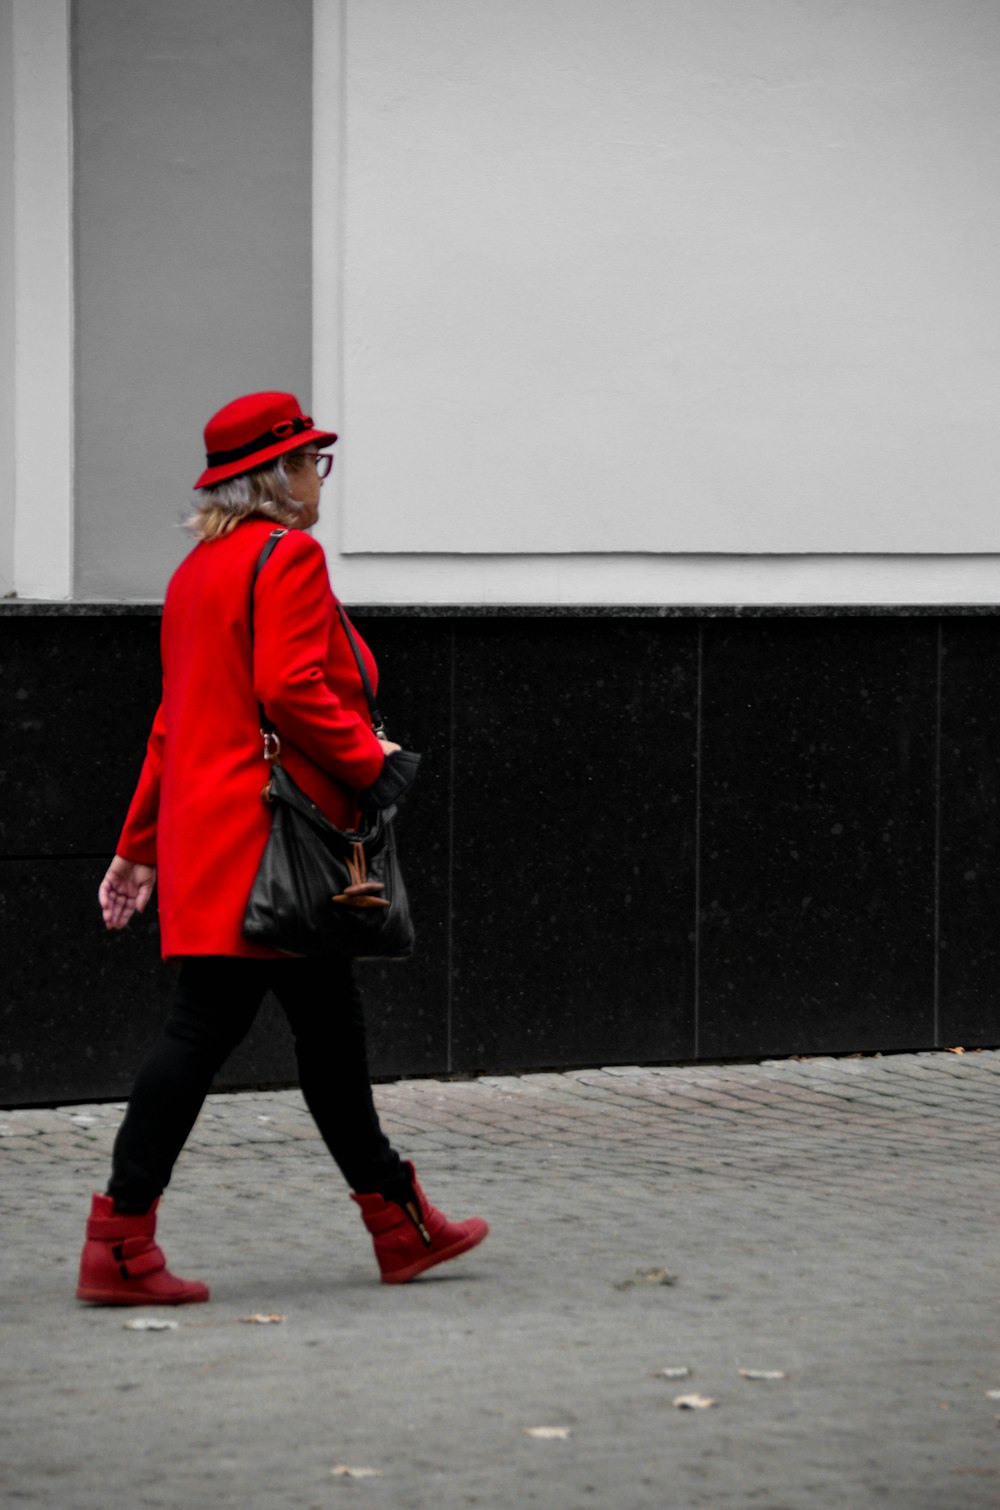 a woman in a red coat is walking down the street